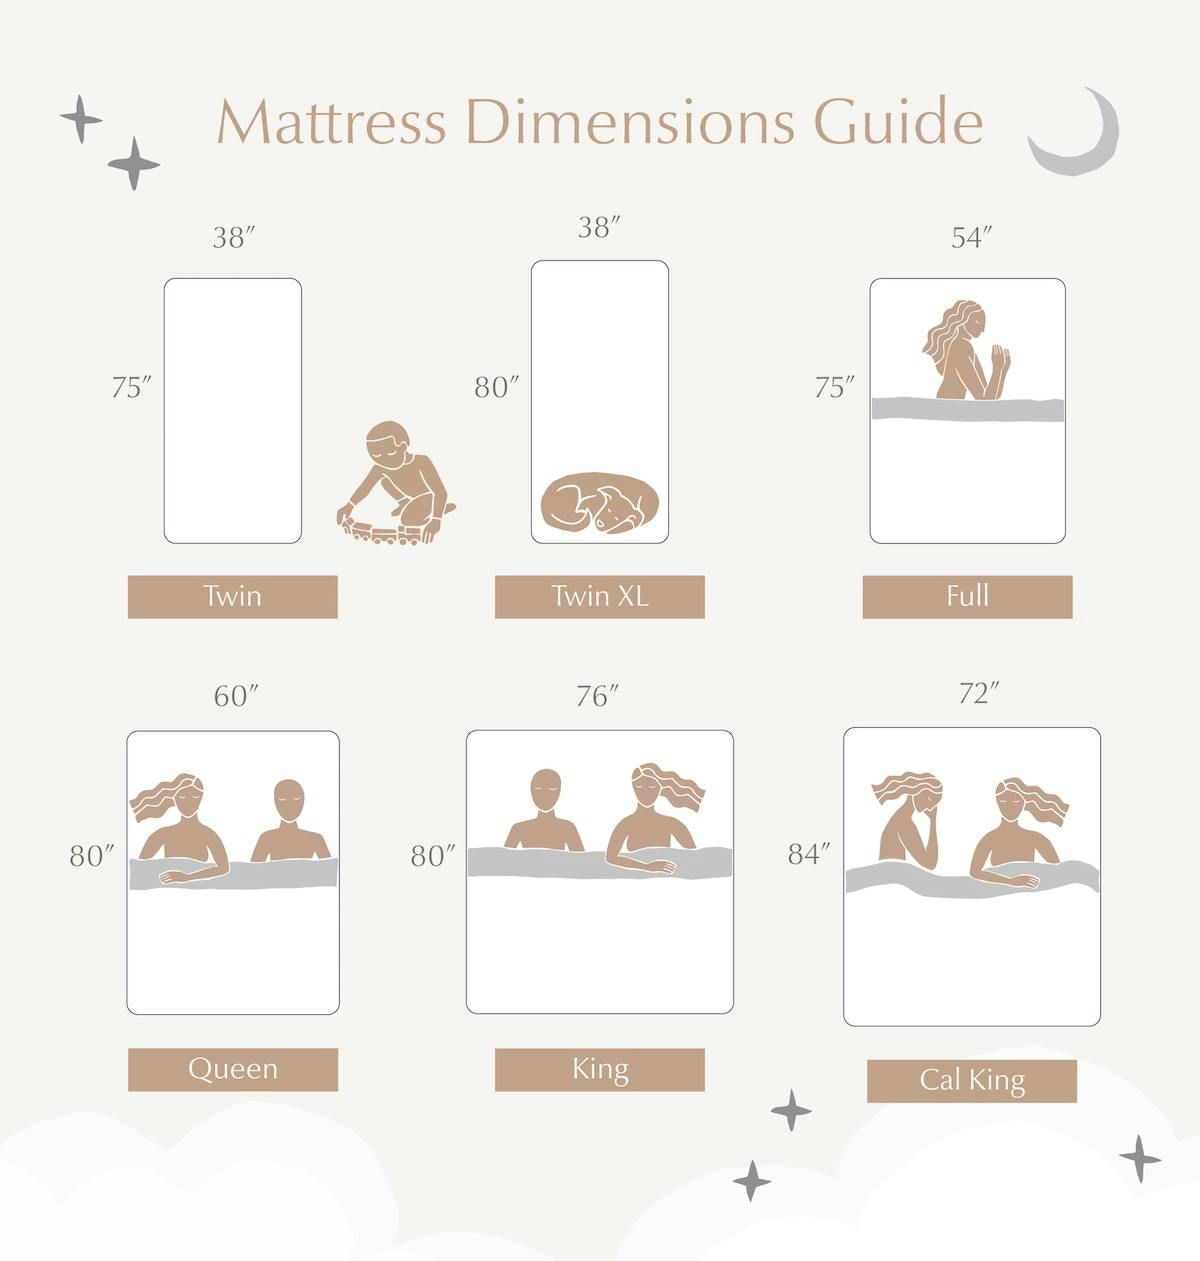 European Mattress Sizes - What Are They? (Complete Size Guide)